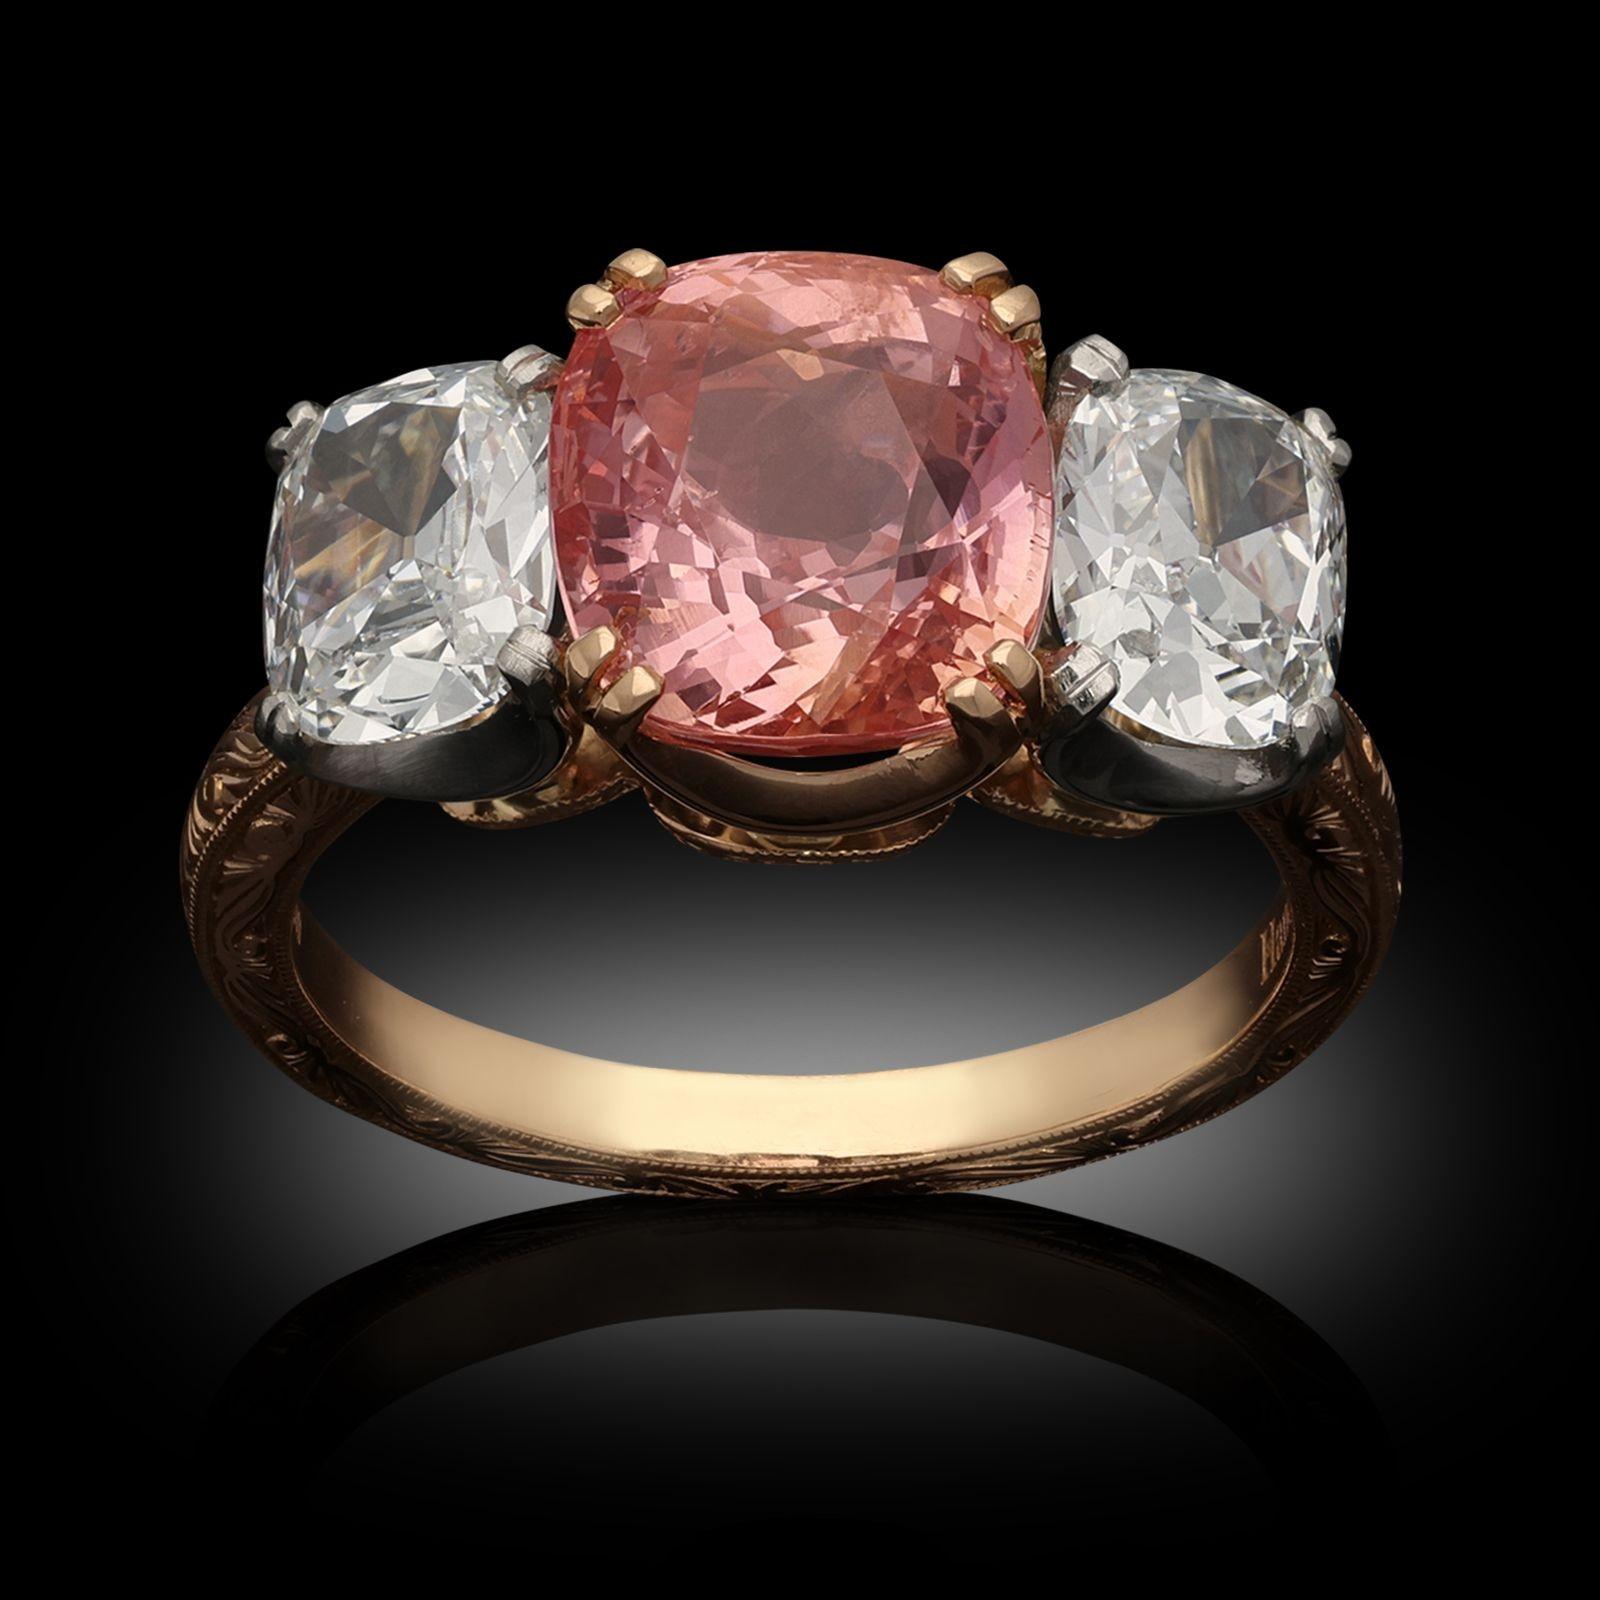 A sapphire and old cut diamond three stone ring by Hancocks, set to the centre with a beautiful cushion shaped Ceylon padparadscha sapphire weighing 4.16cts claw set in 18ct rose gold between two old mine cushion cut diamonds, one weighing 0.73ct